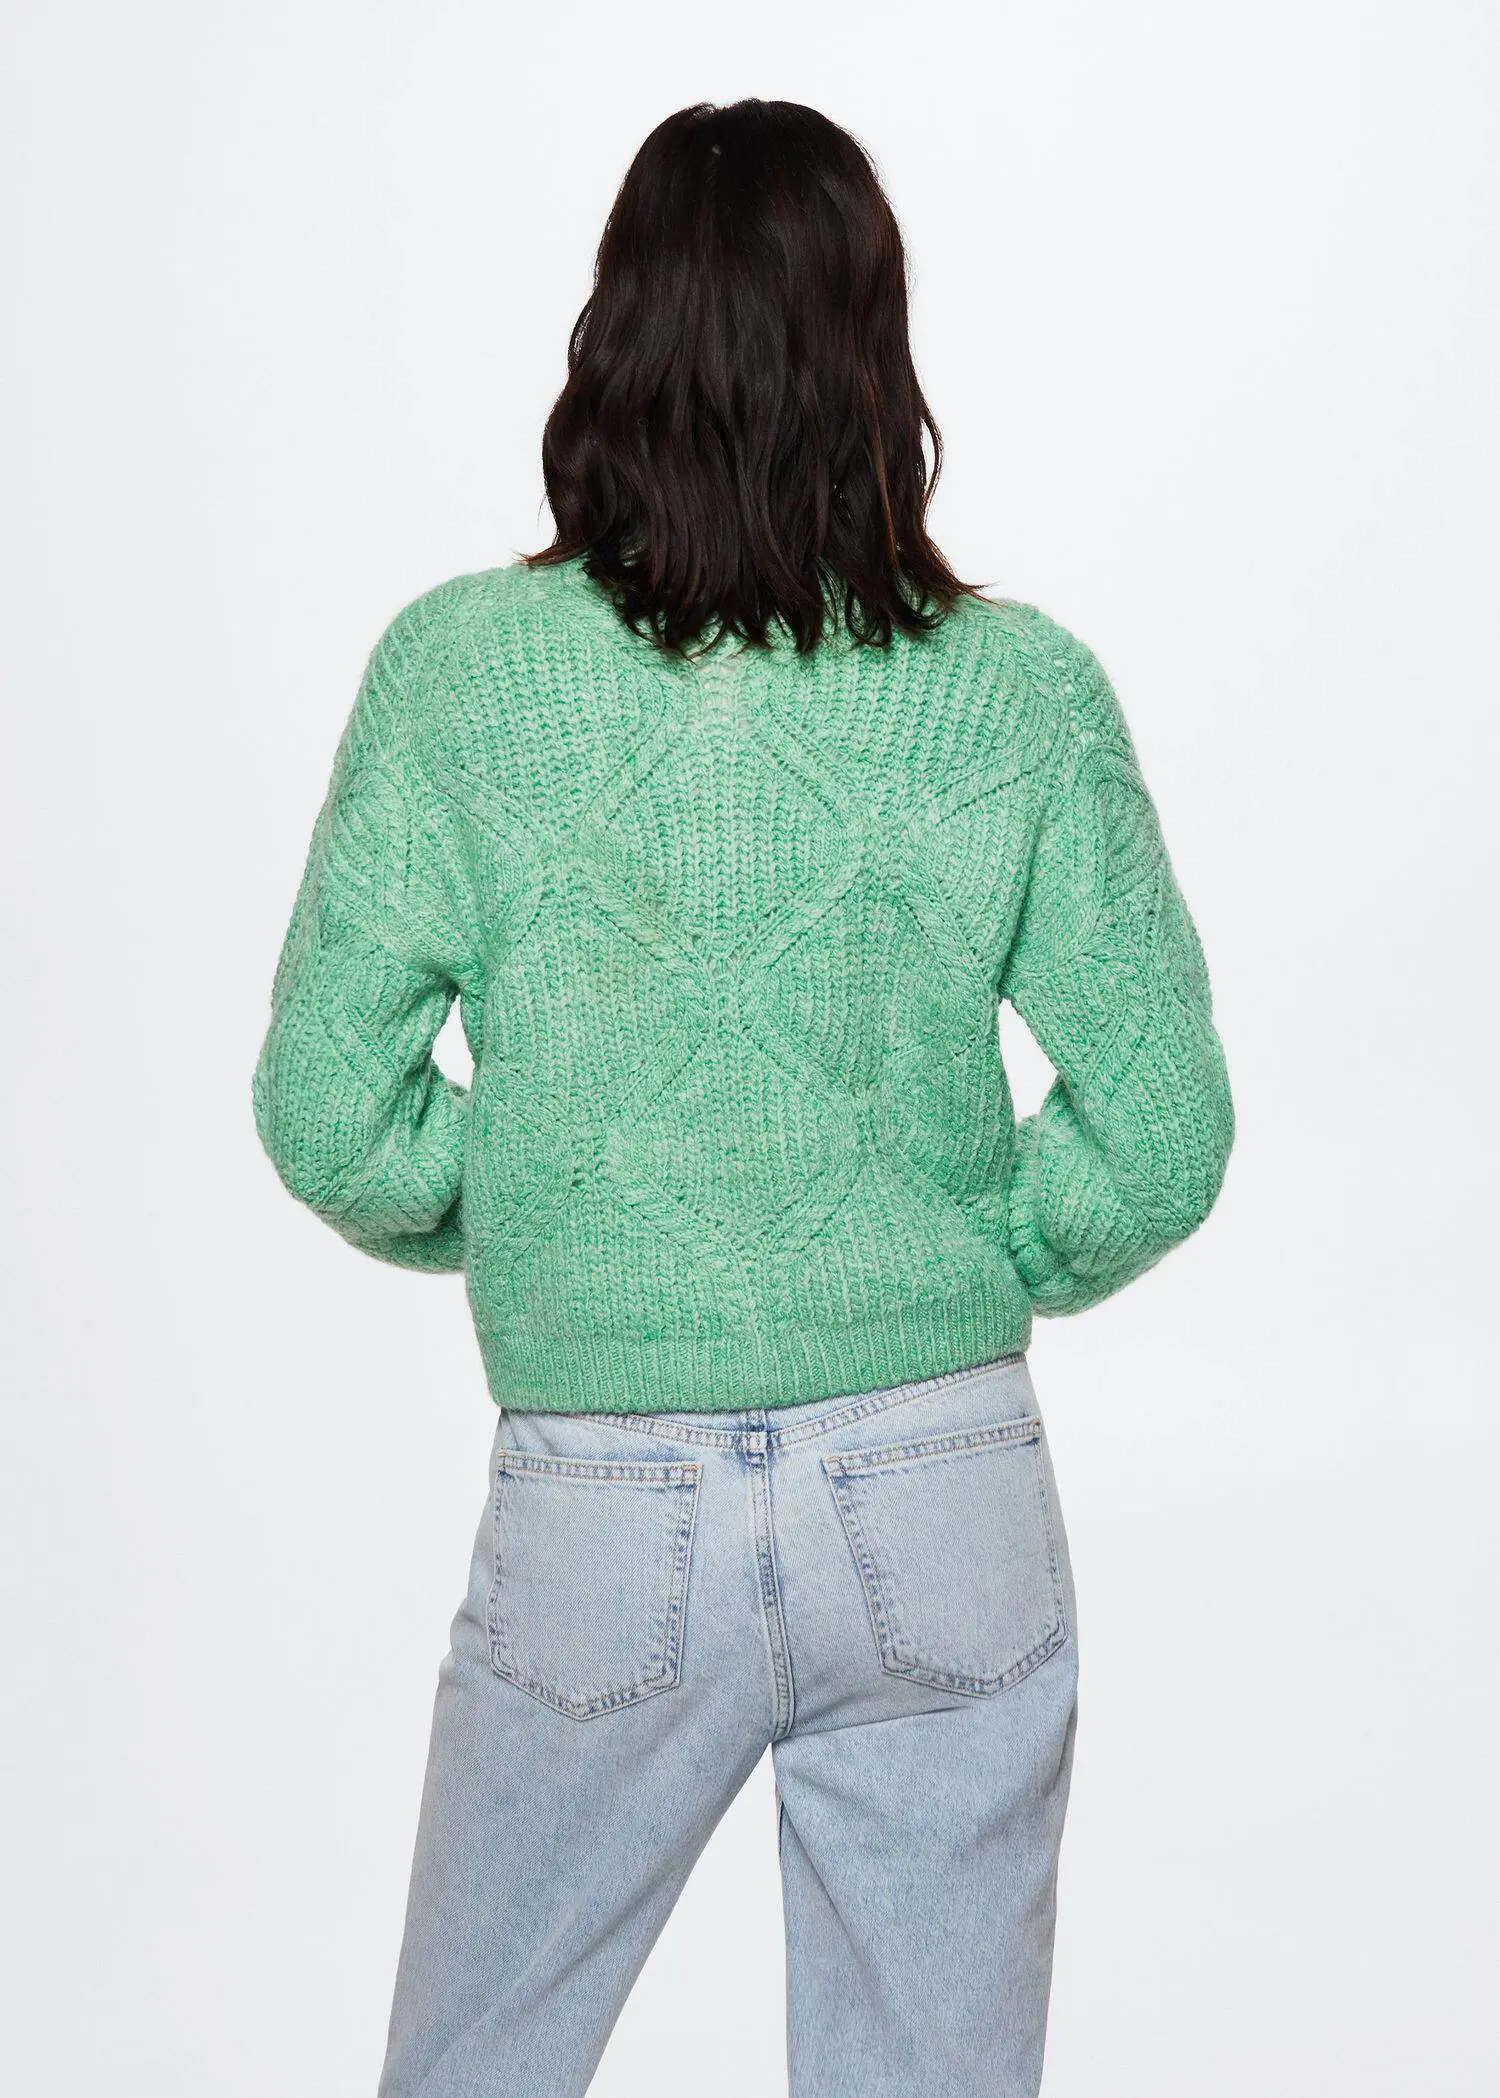 Mango Cable-knit cardigan. a person wearing a green sweater and jeans. 